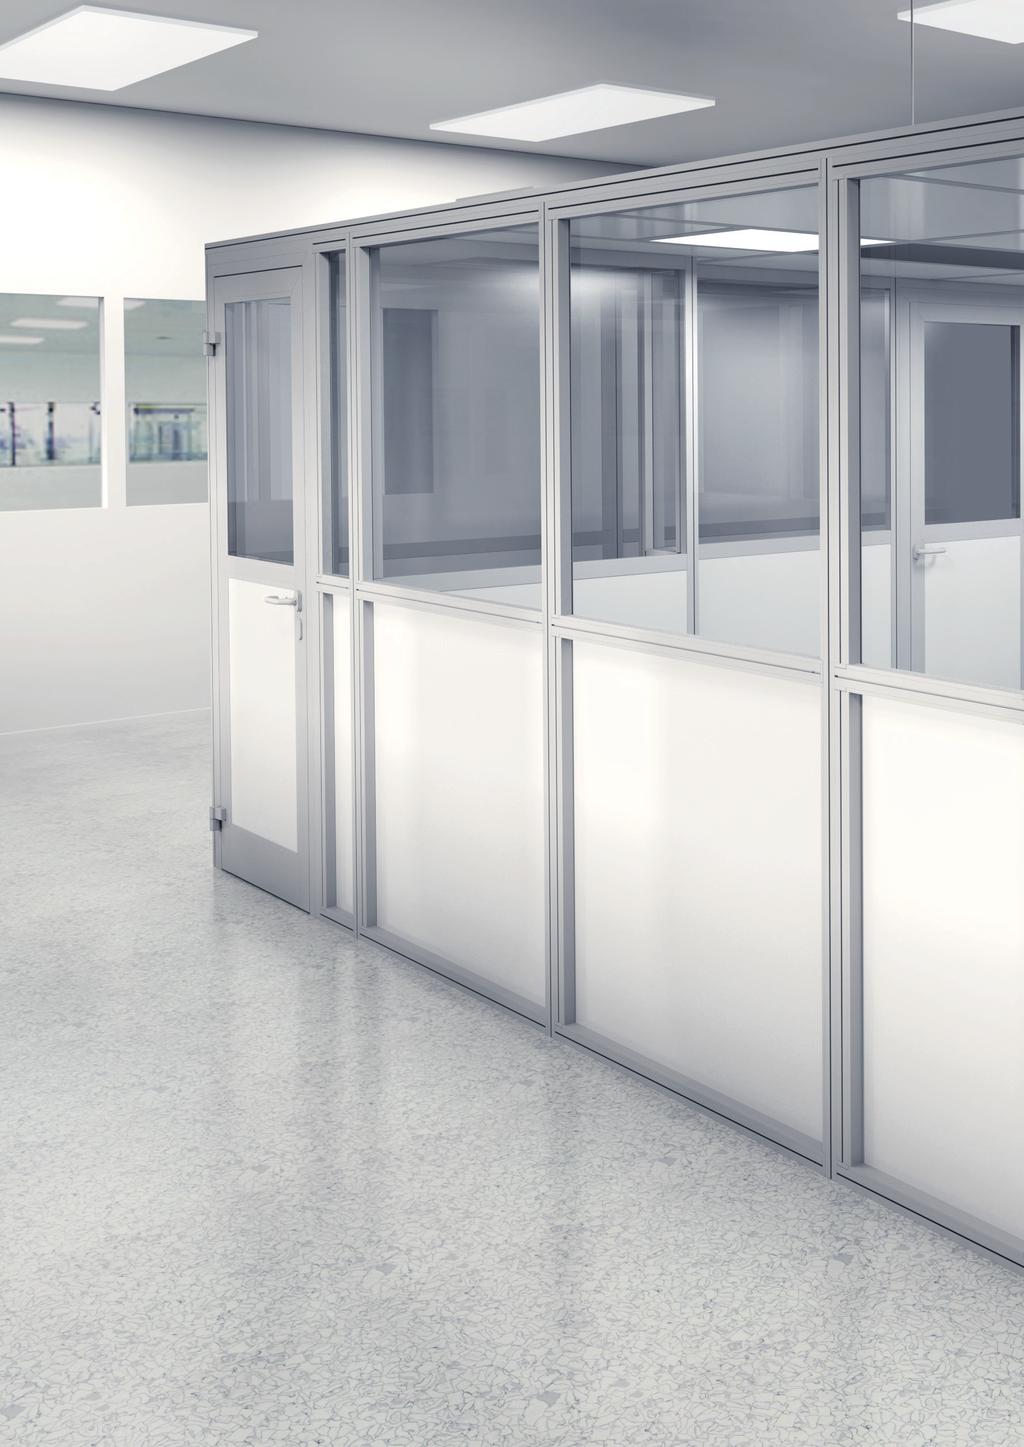 MODULARE FLEXIBILE MOBILE FOR A DIVERSE CLEANROOM The necessity: temporary to permanent. The application: mobile.